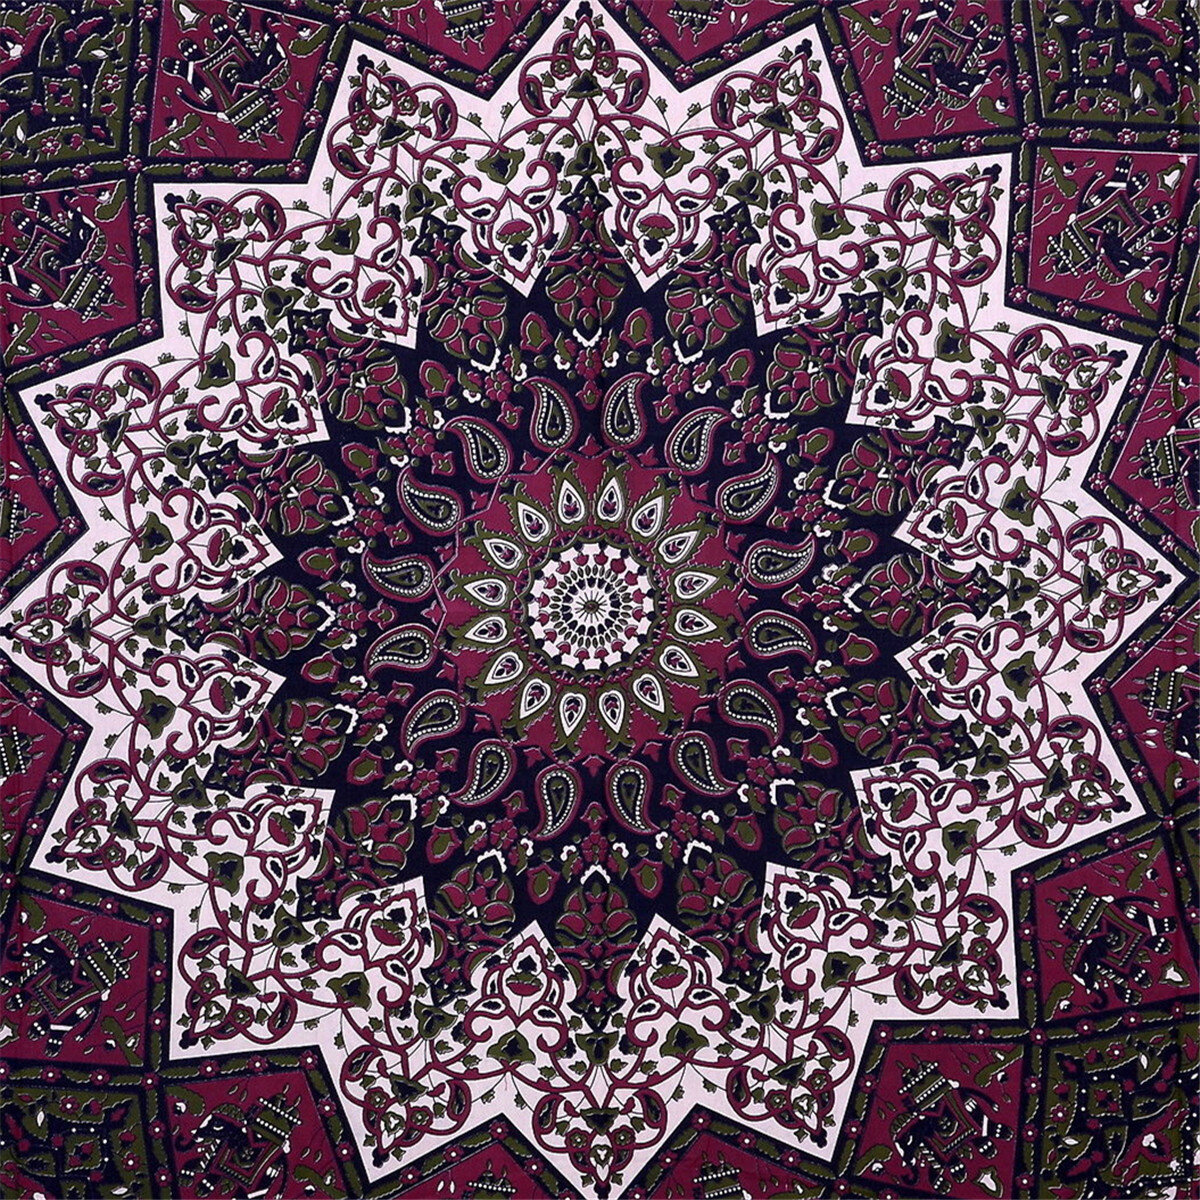 

Indian Star Tapestry Hippie Mandala Psychedelic Print Wall Hanging Tapestry Photographic Cloth Art Home Decor For Decora